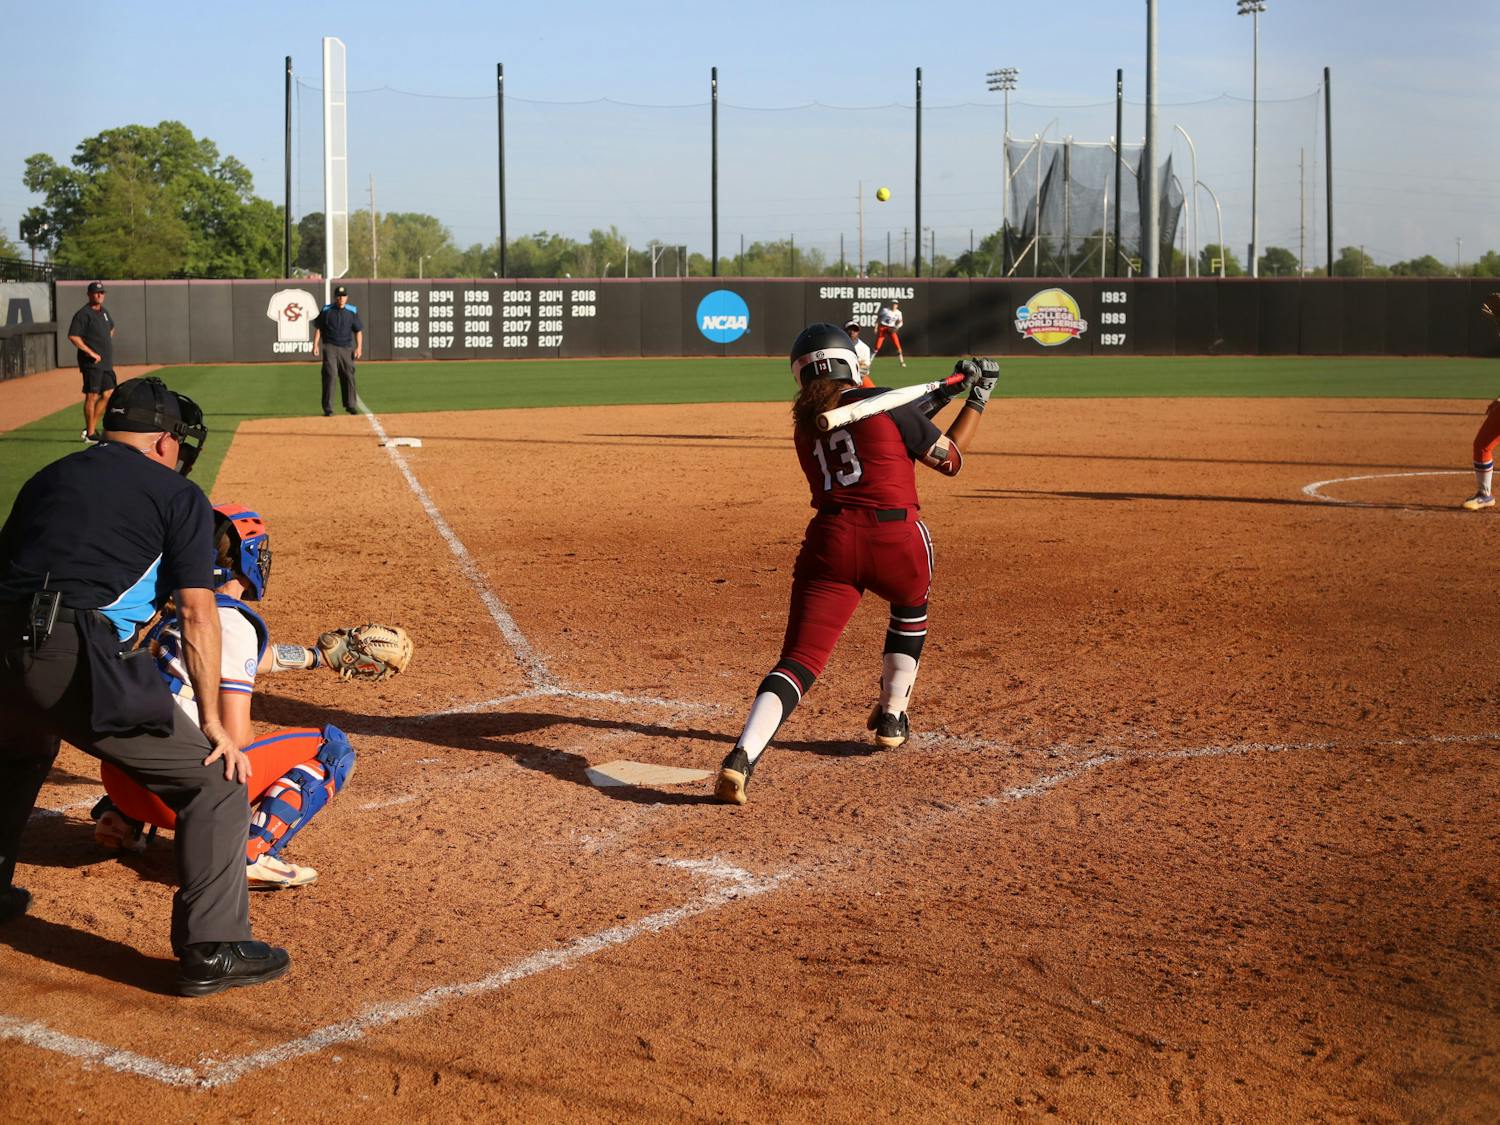 Junior infielder Zoe Laneaux hits a single in the sixth inning for the Gamecocks in its game against Florida on April 1, 2023. In the second game of the series, South Carolina softball team struggled to find its rhythm, losing 8-1.